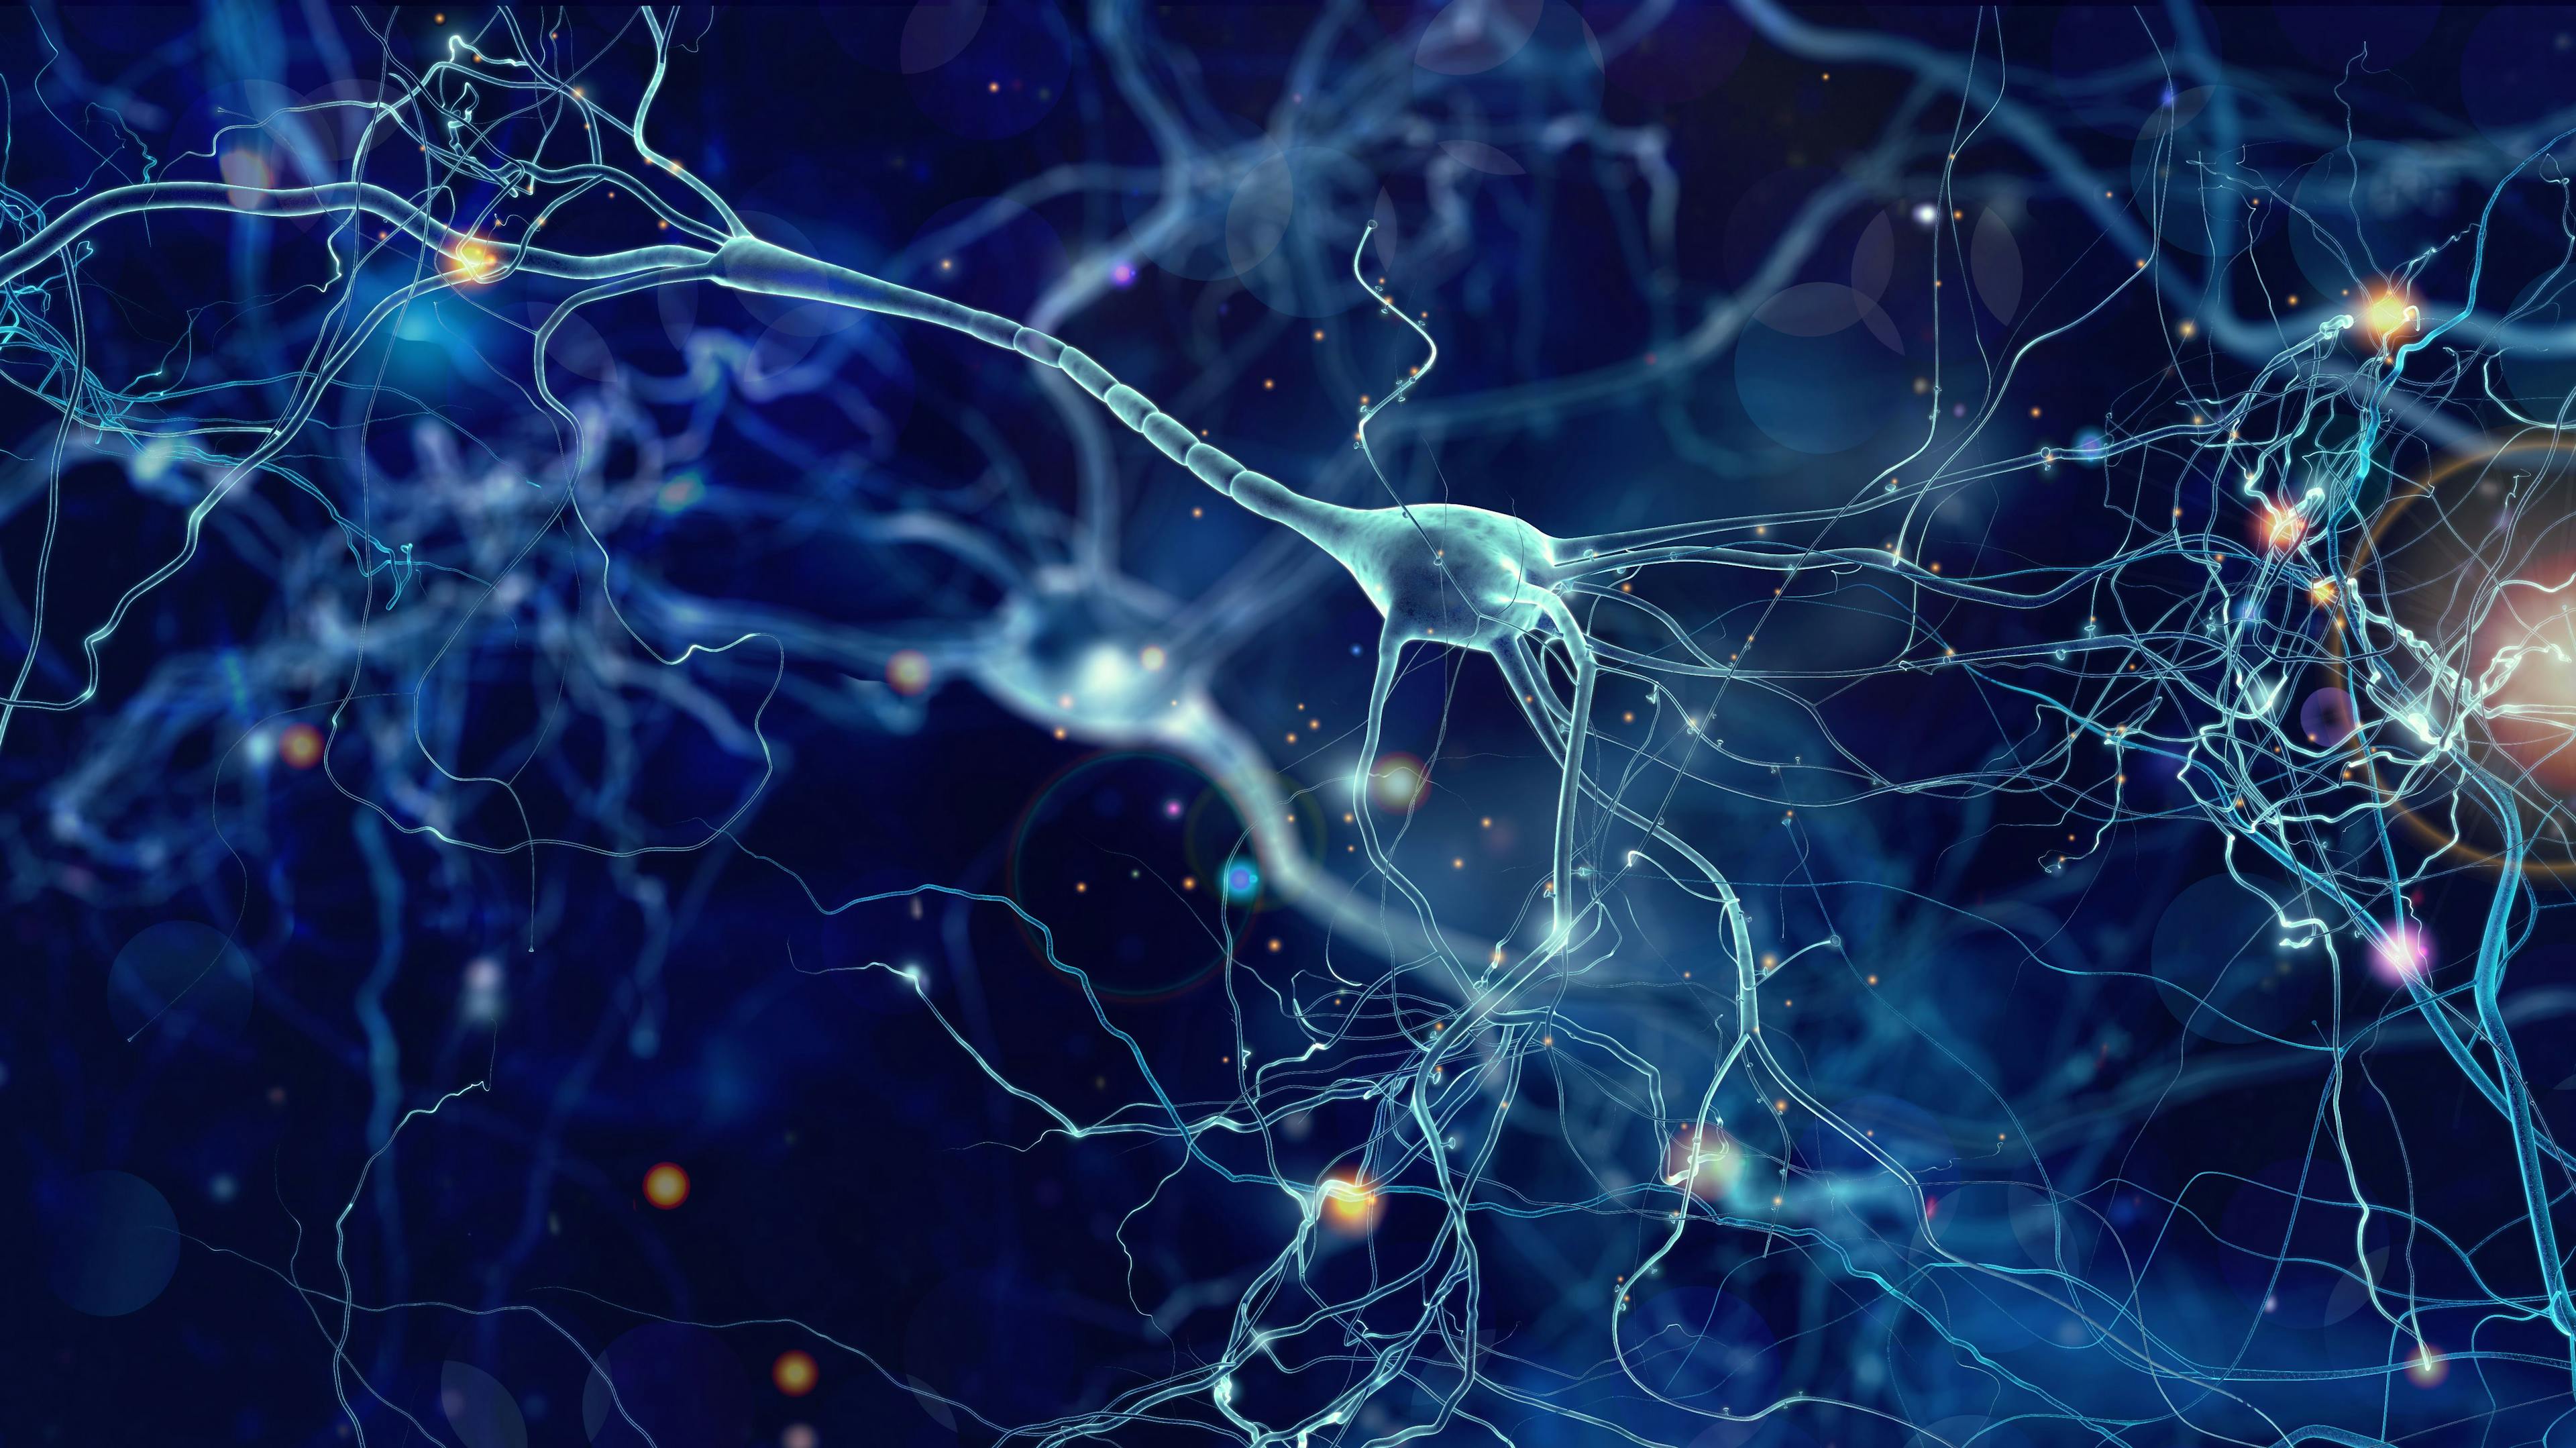 Neurons cells concept | Image Credit: whitehoune - www.stock.adobe.com 